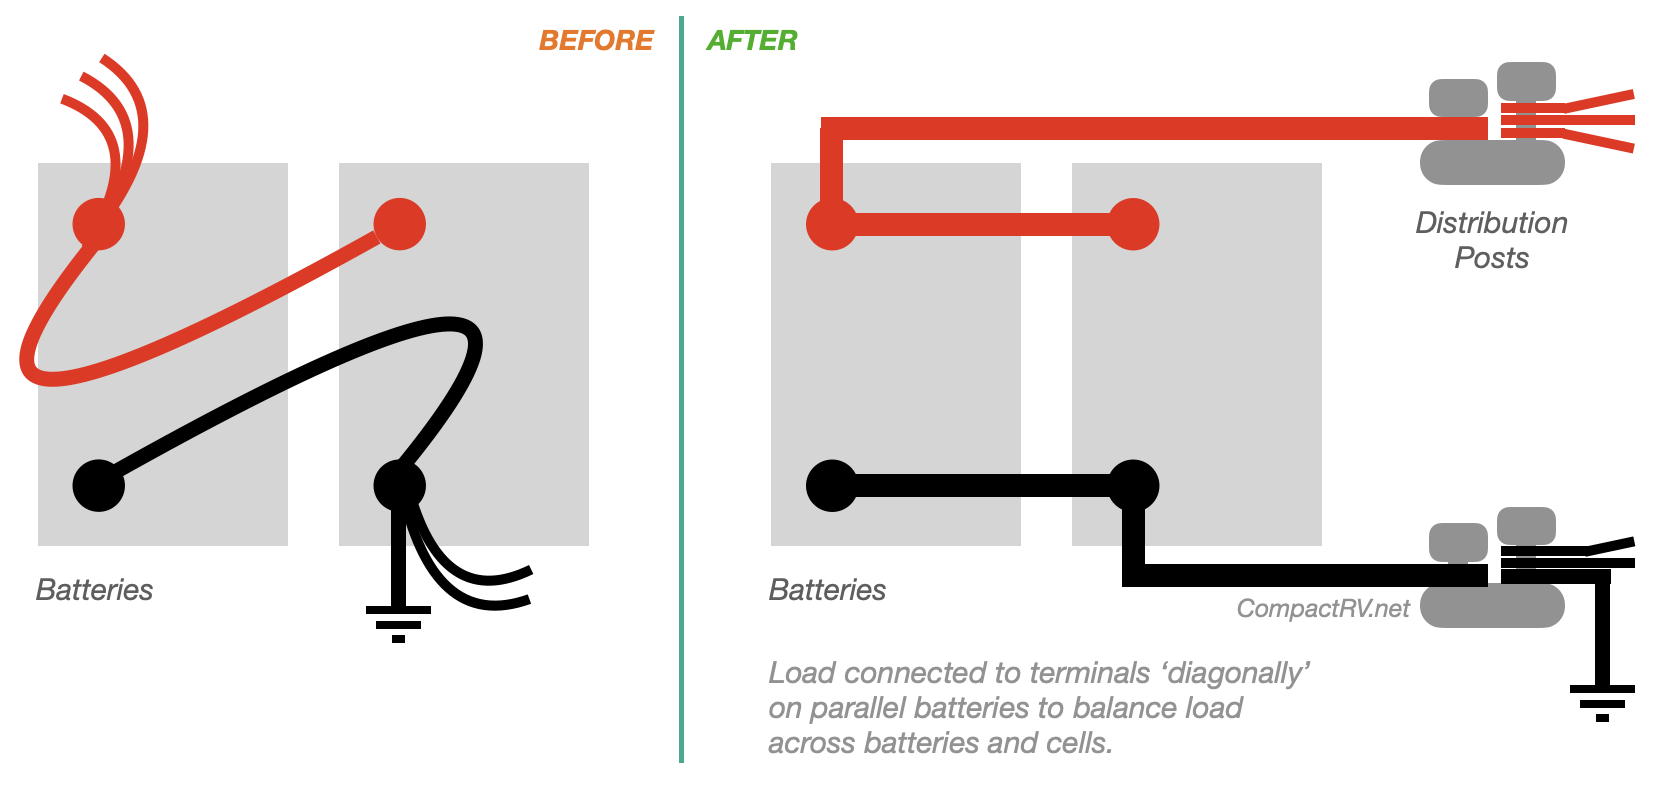 Battery cabling before and after